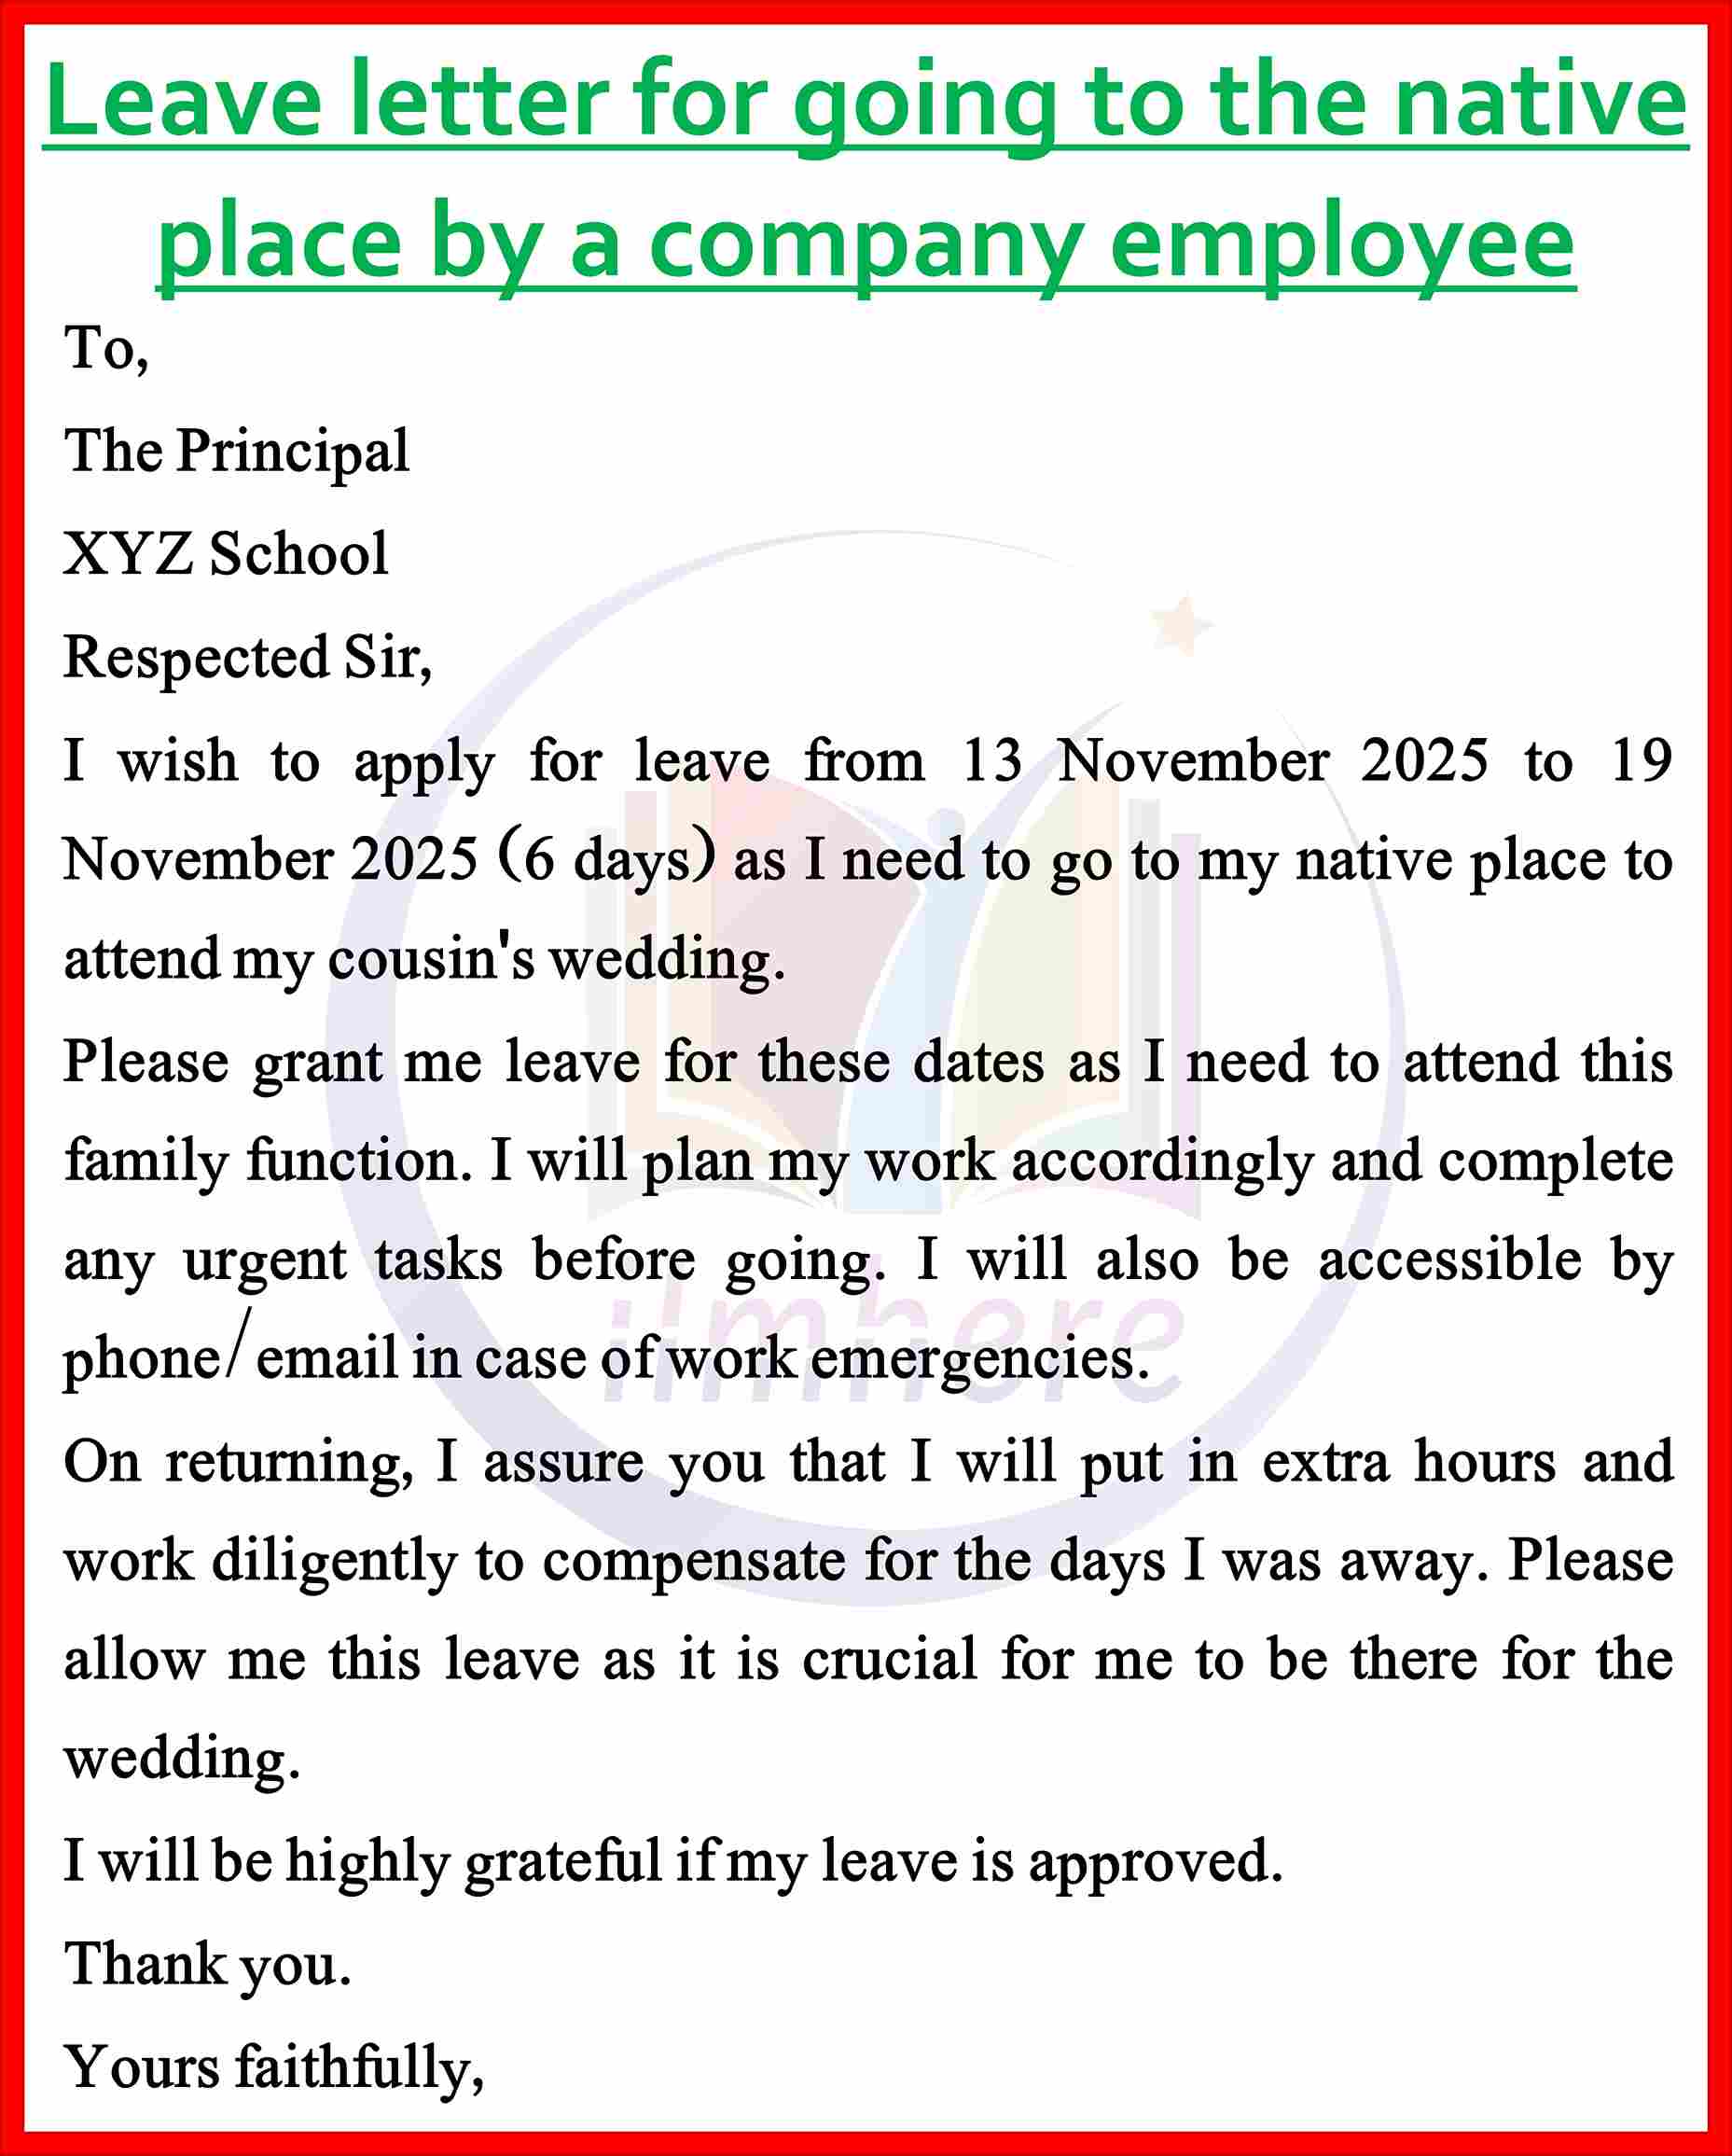 School Leave Application For Going Out Of Station